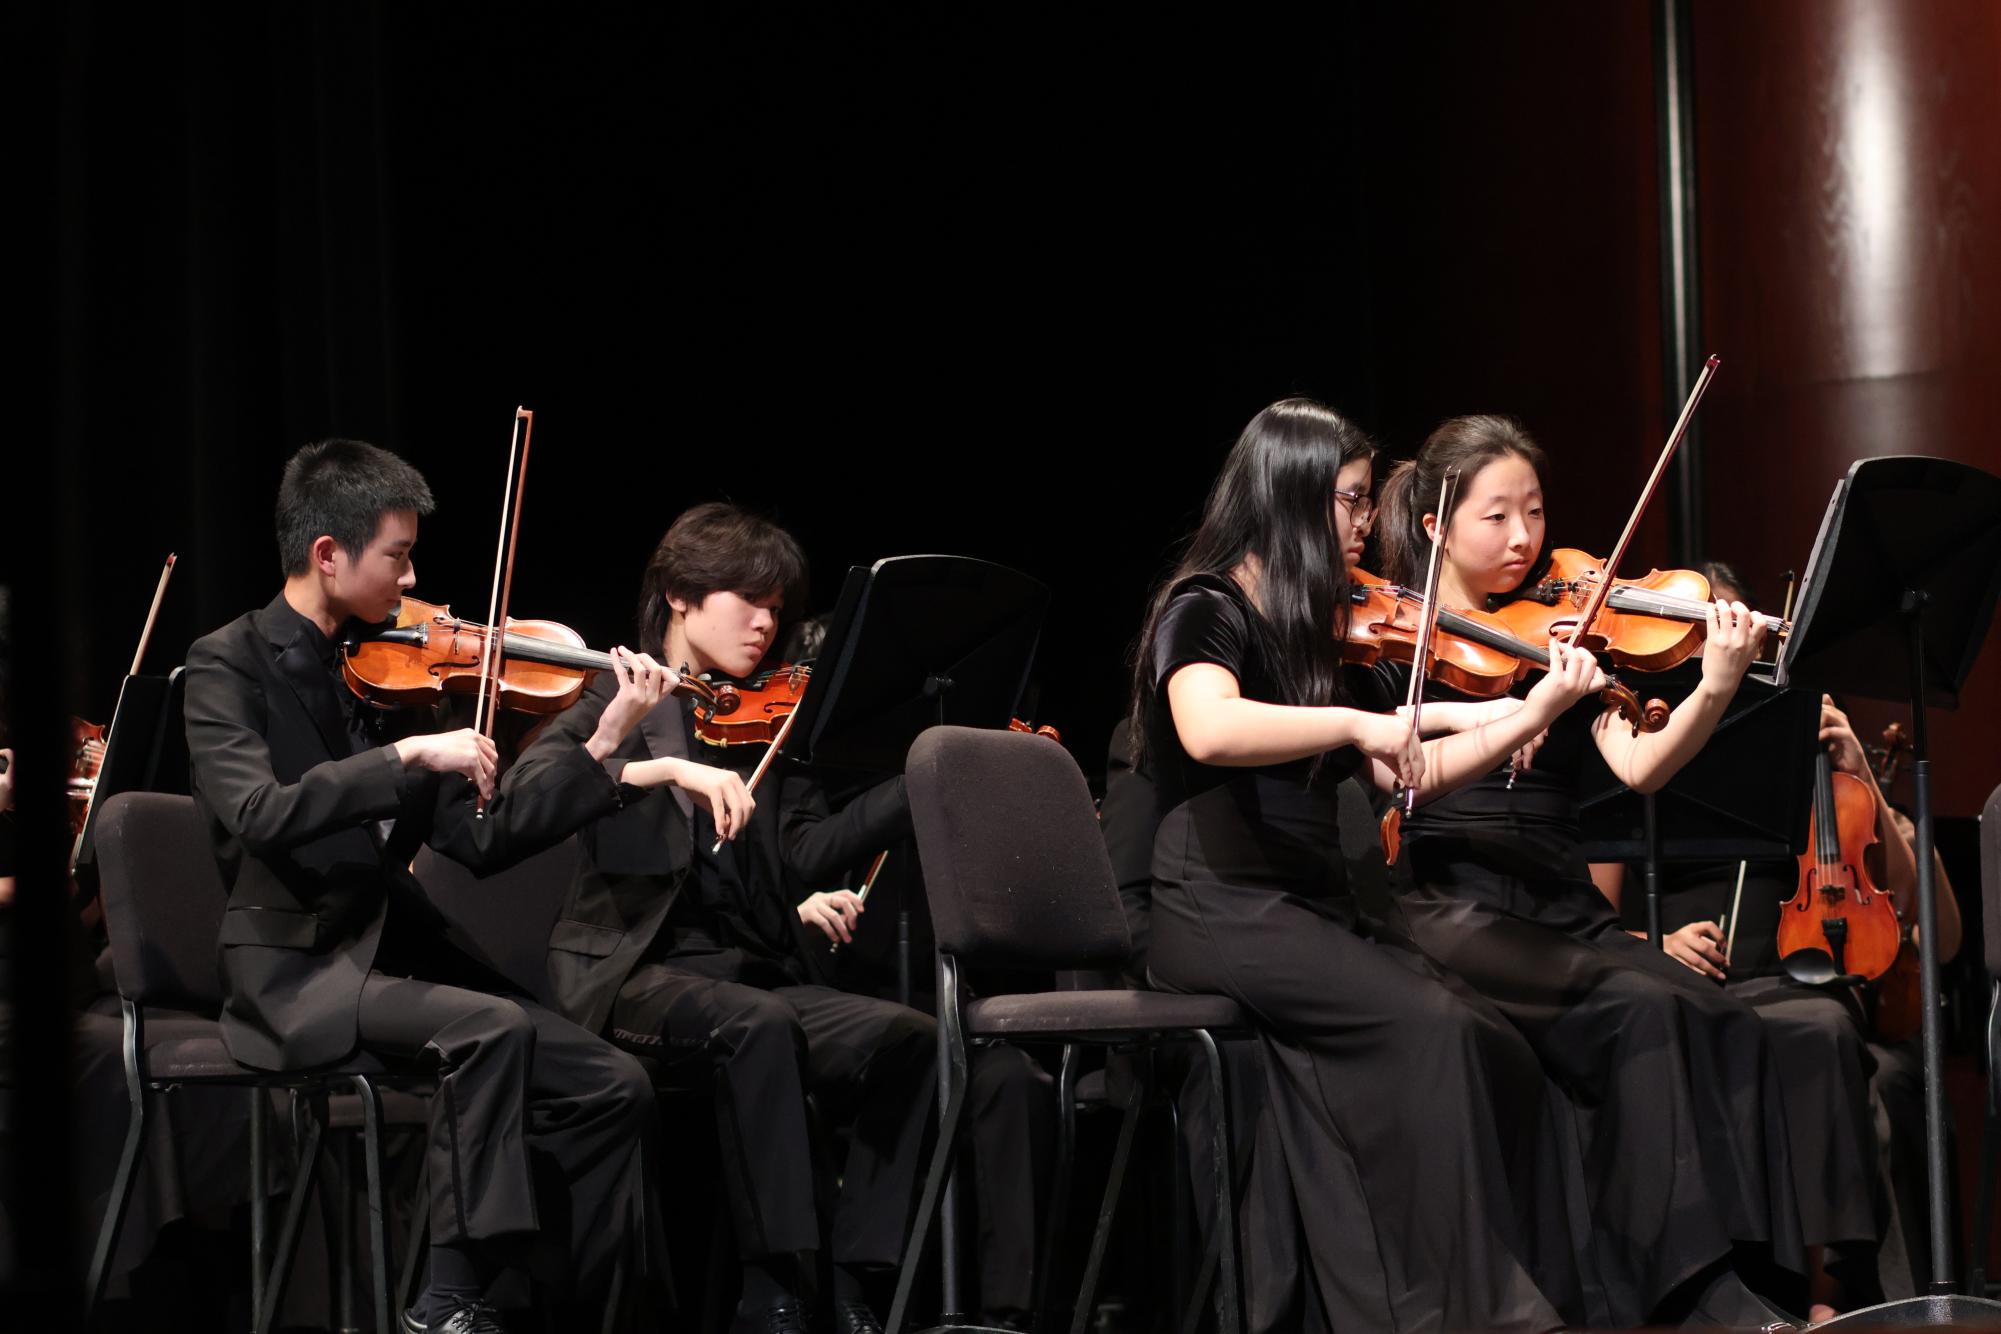 Orchestra+Sets+Stage+Aglow+at+Winter+Concert